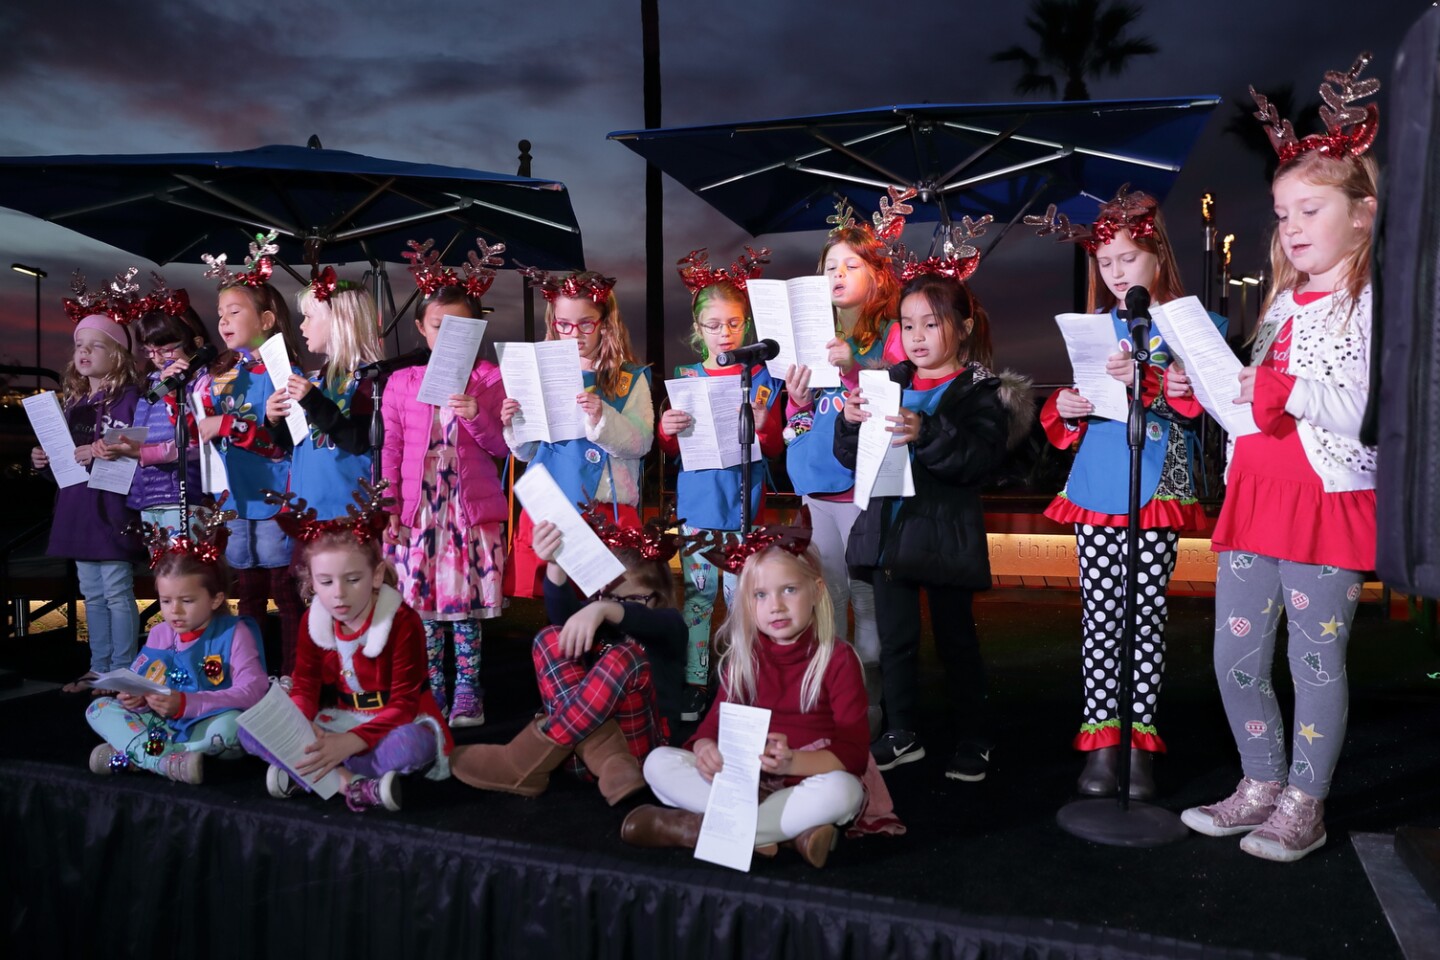 Girl Scouts from Carmel Creek School sang holiday songs